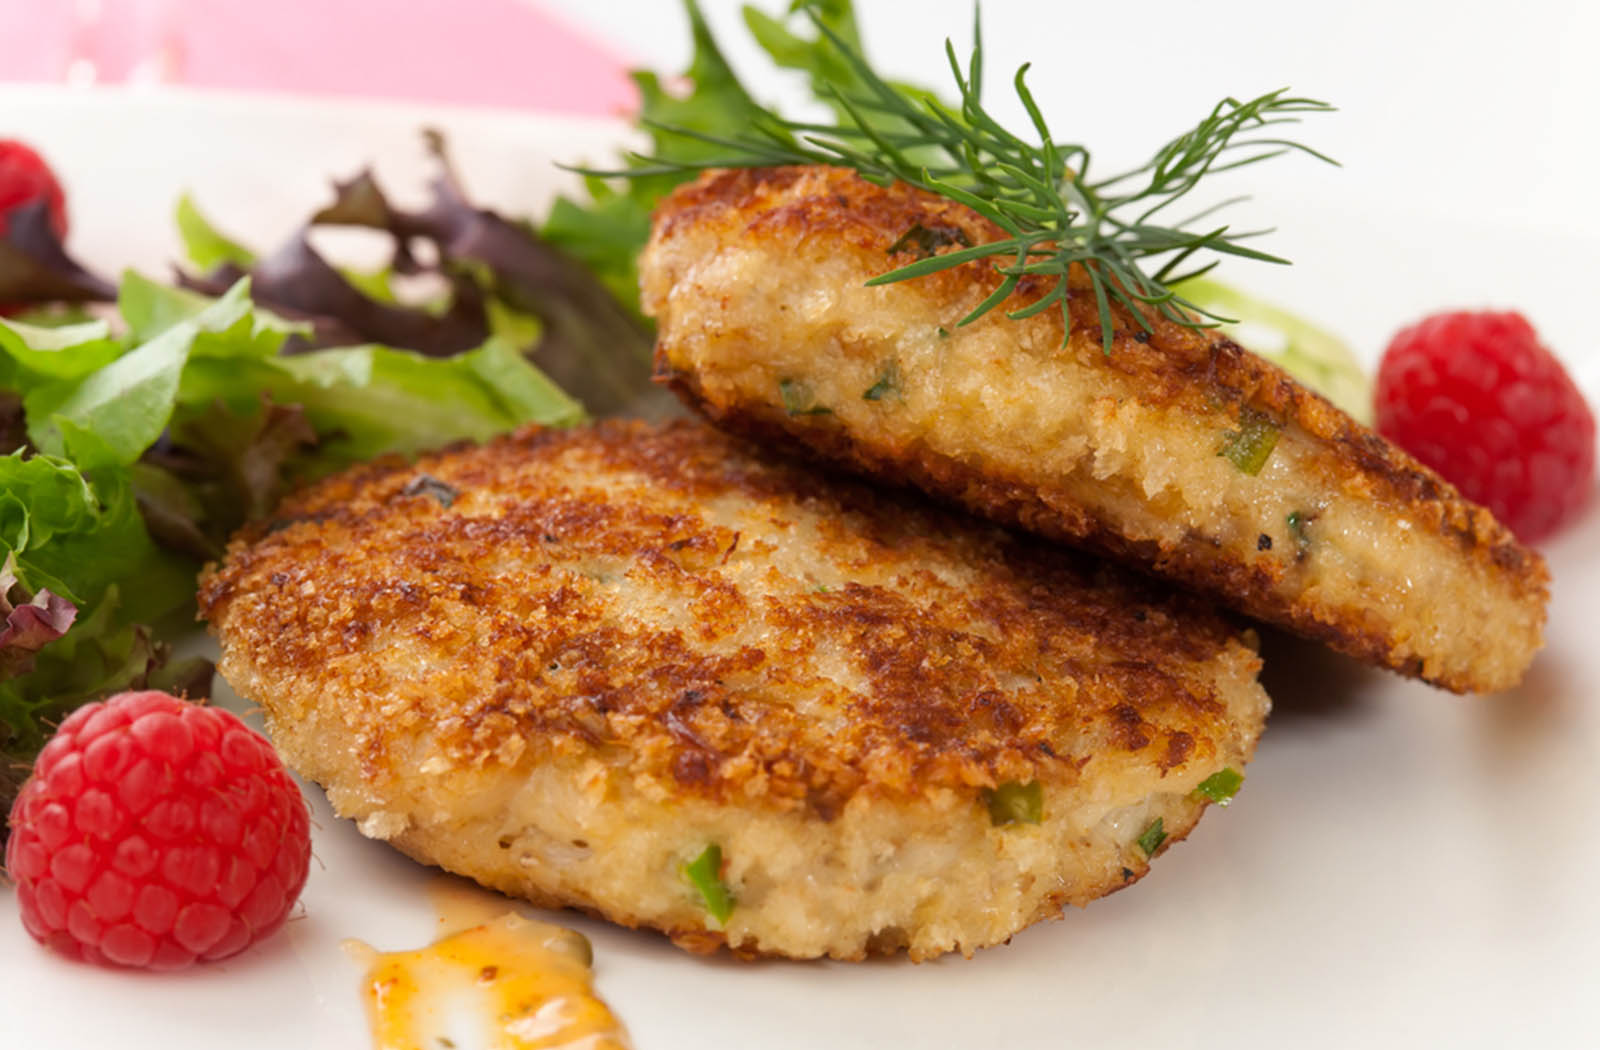 Spicy Crab Cakes Recipe - How to make Spicy Crab Cakes